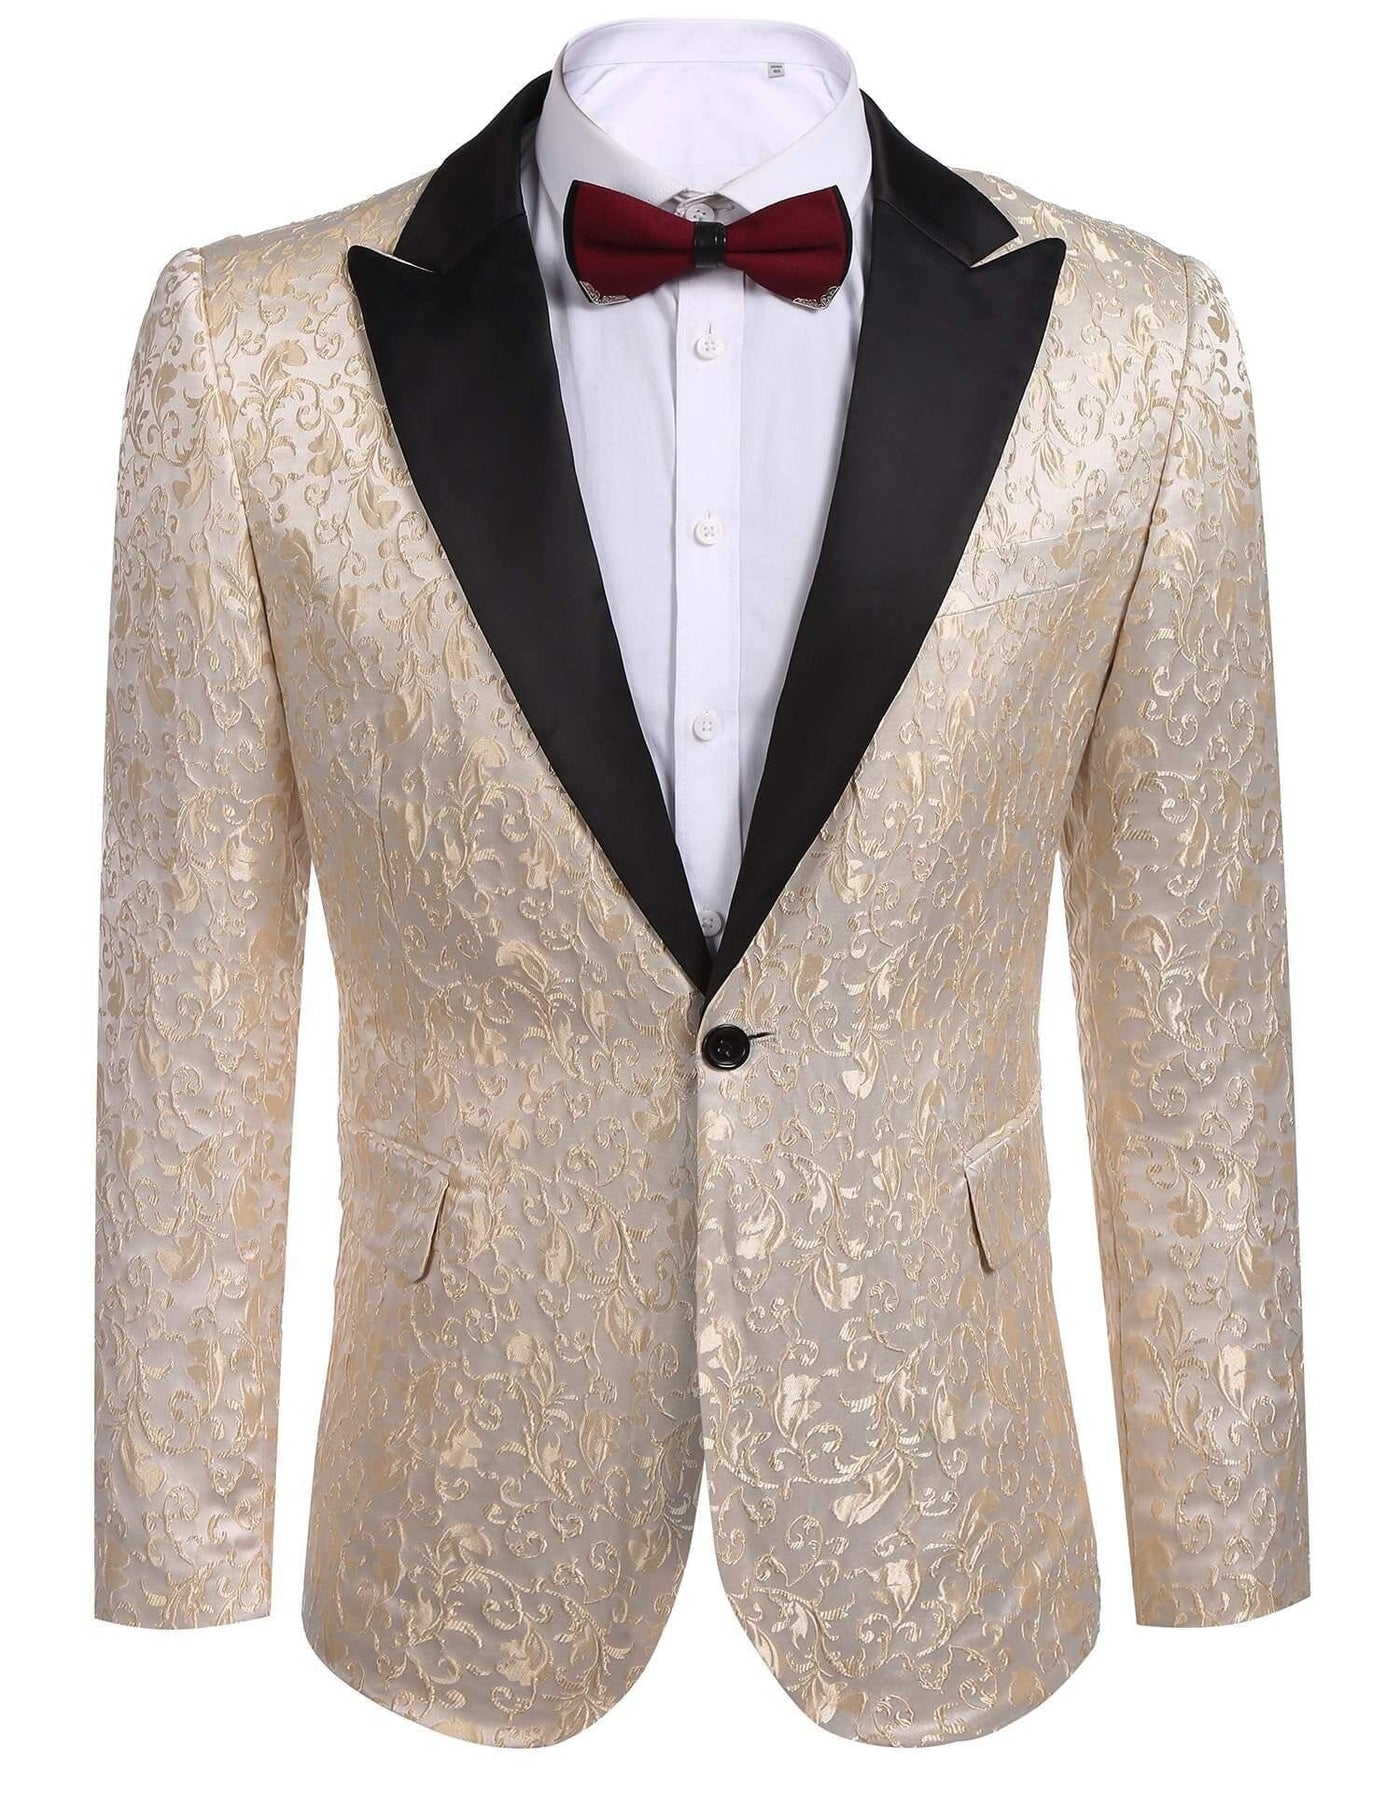 Coofandy Floral Party Tuxedo (US Only) Blazer coofandy Golden XS 